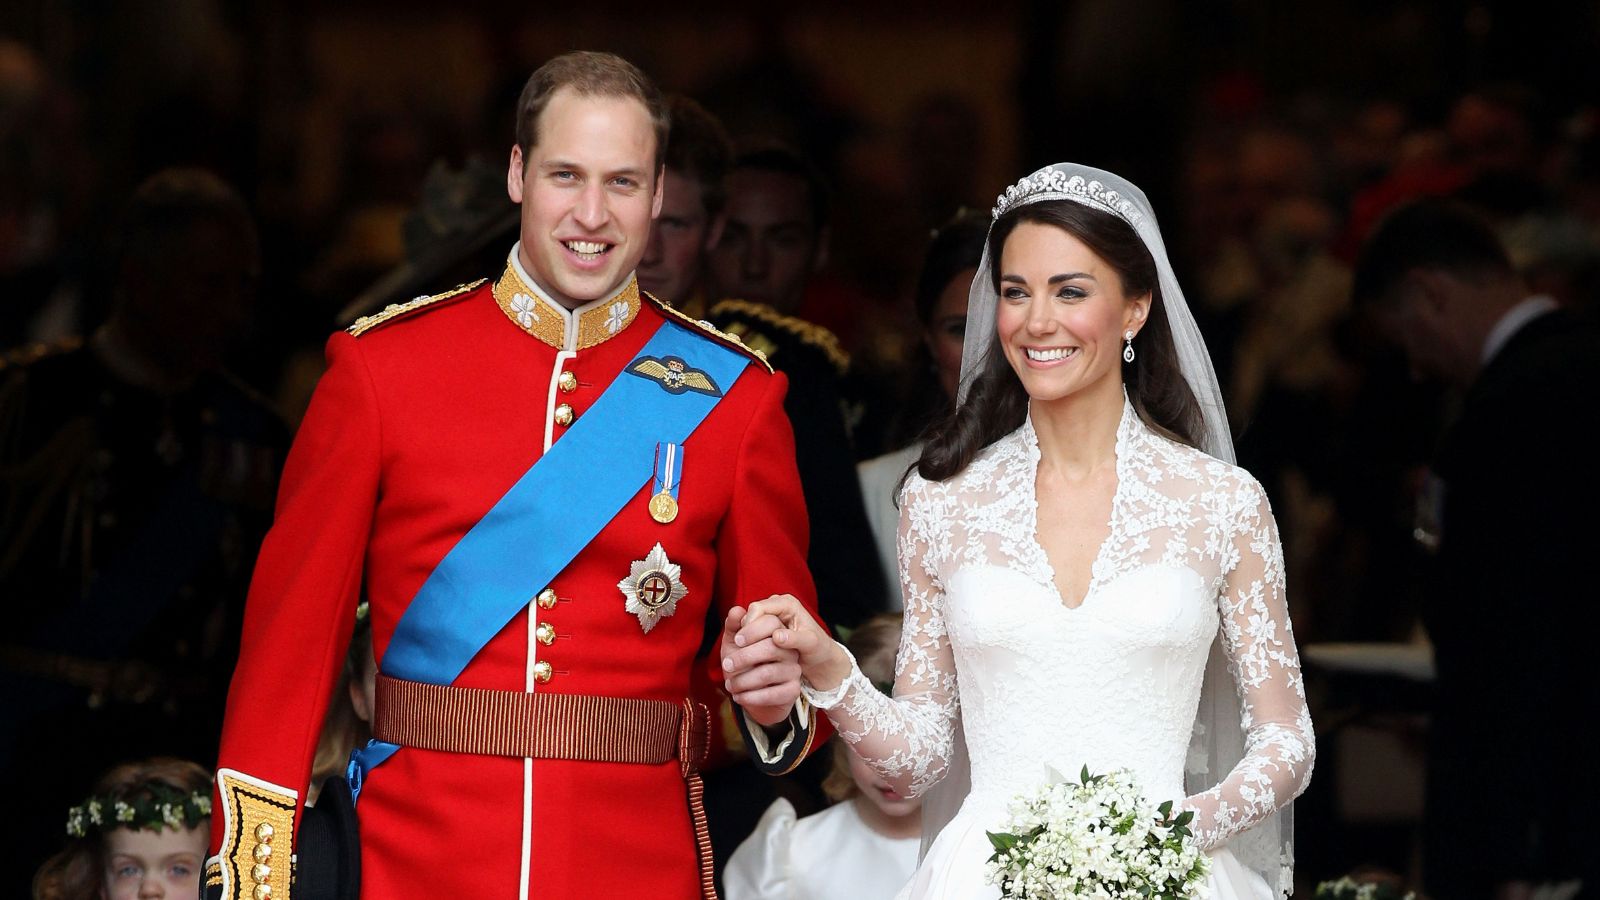 Kate Middleton and Prince William’s relationship in pictures - 2011 wedding day